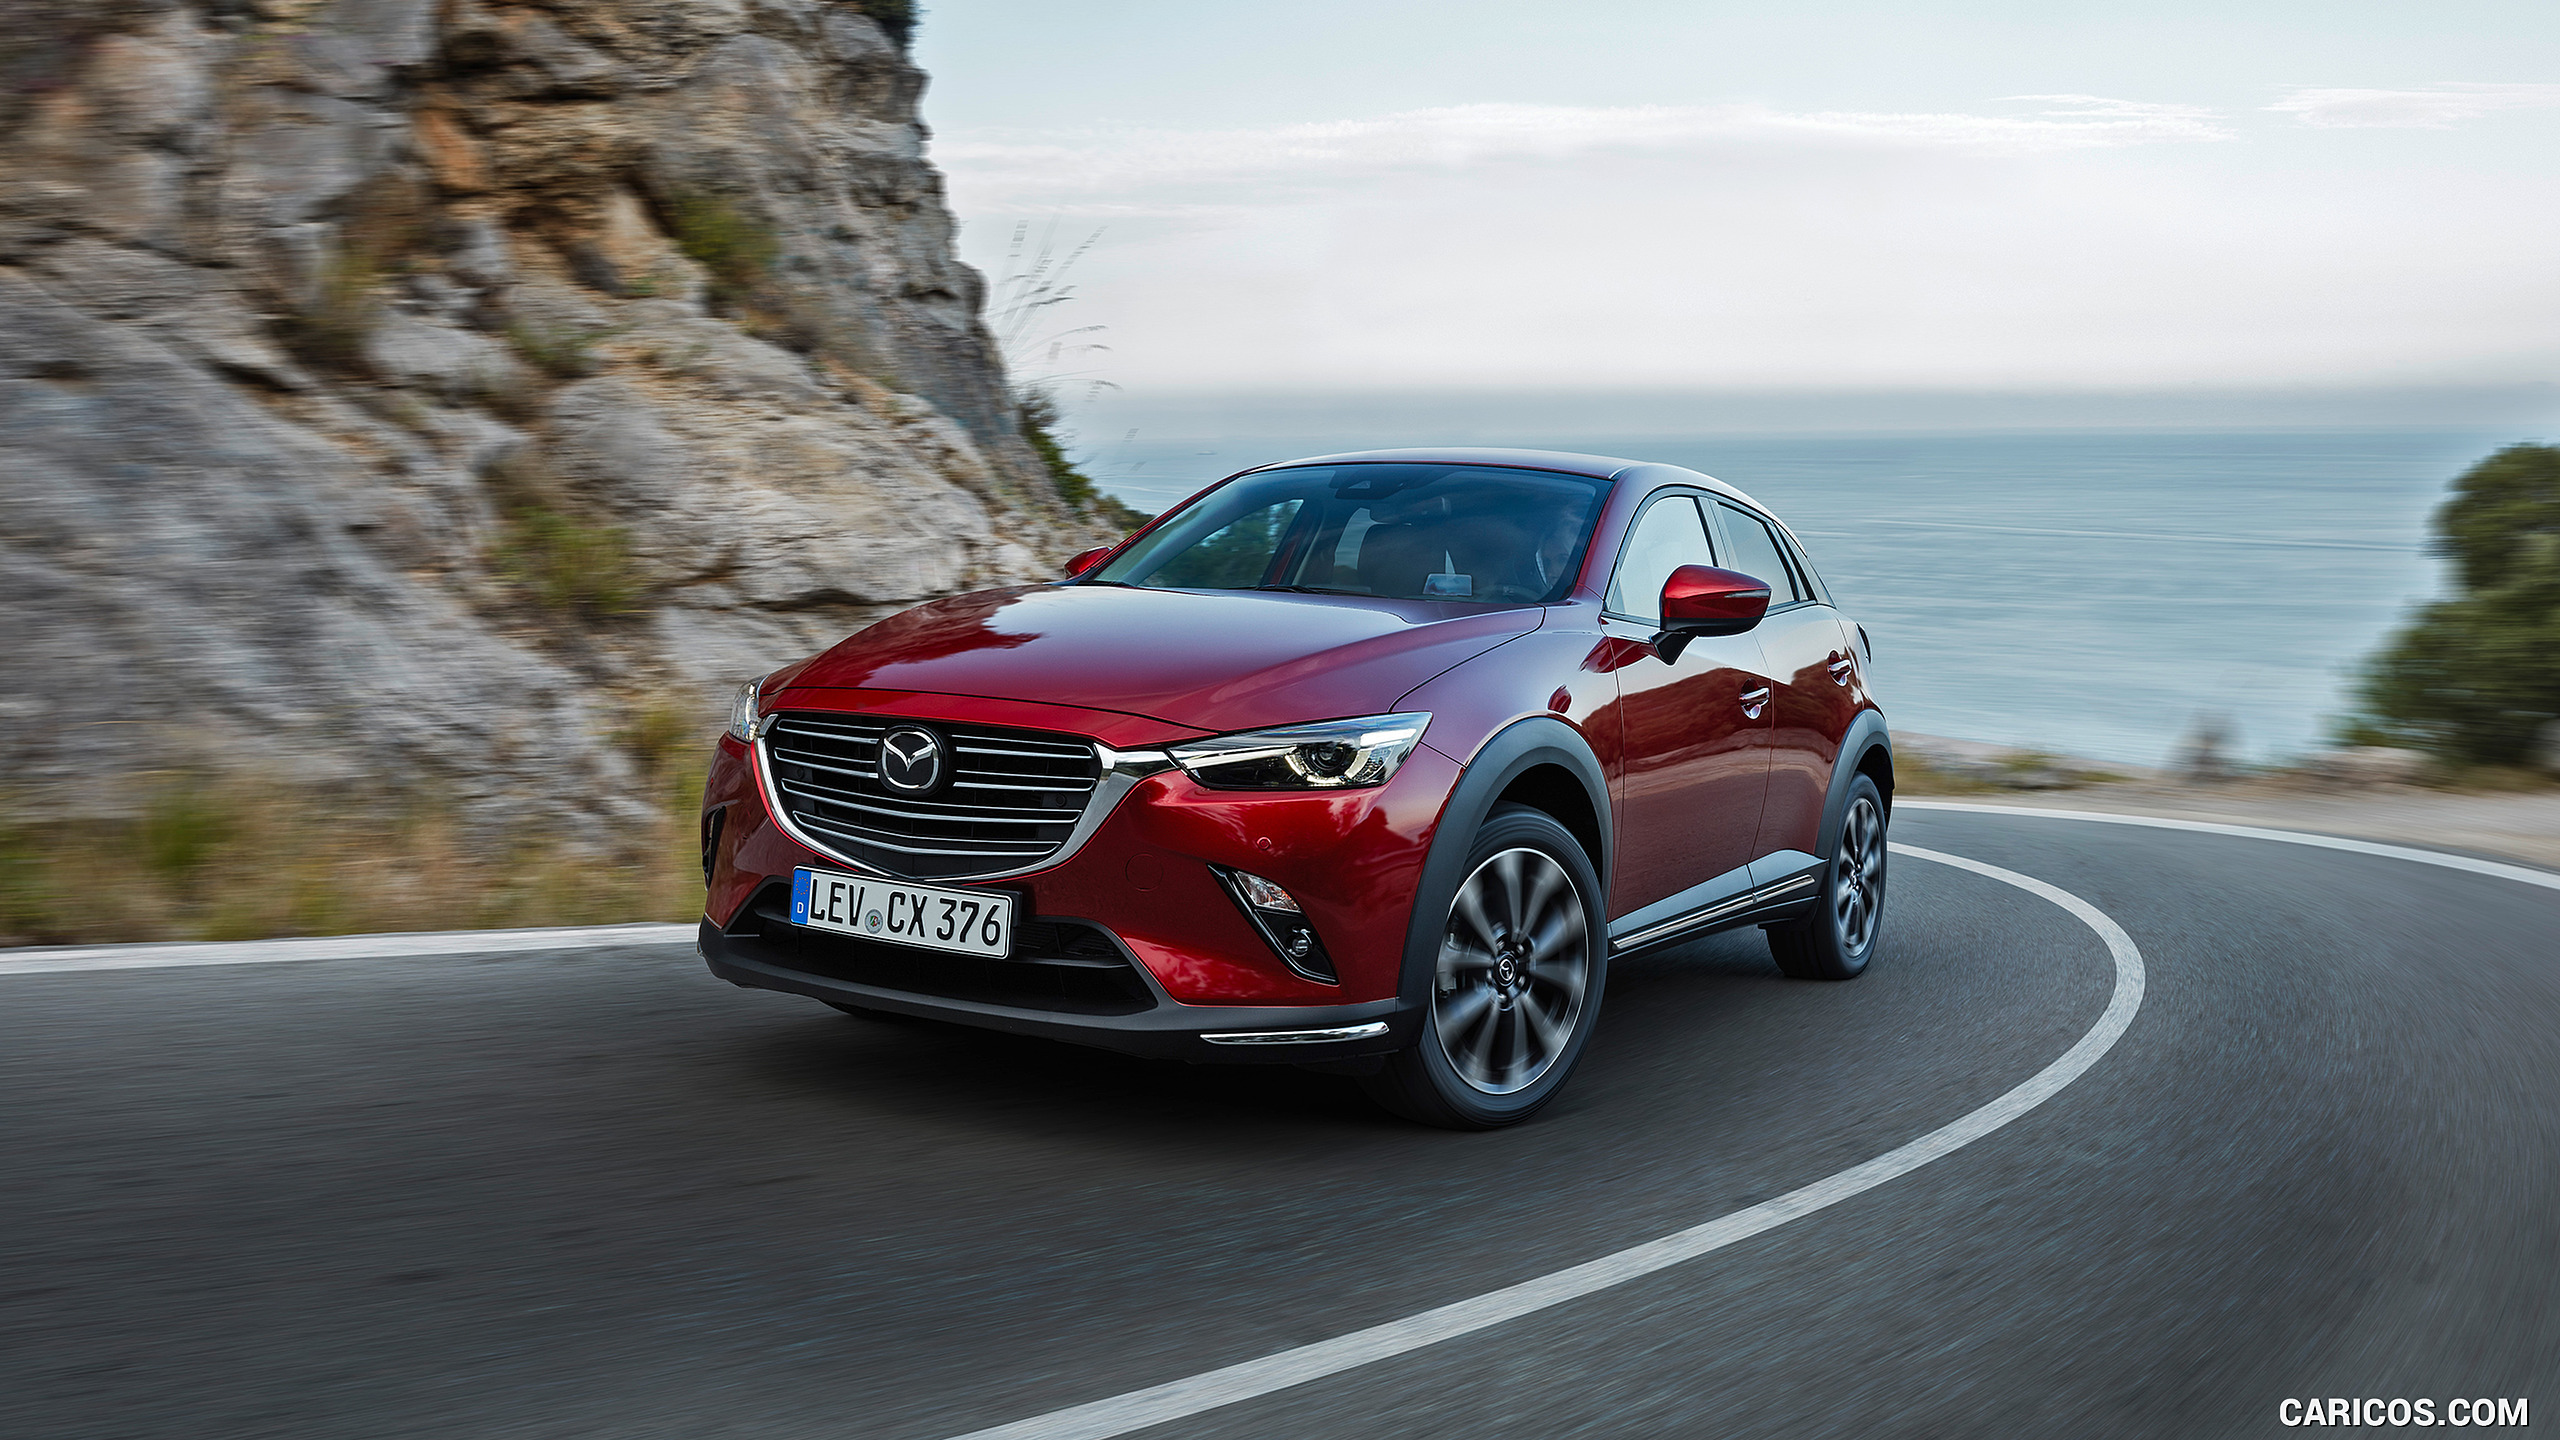 2019 Mazda CX-3 - Front, #20 of 85